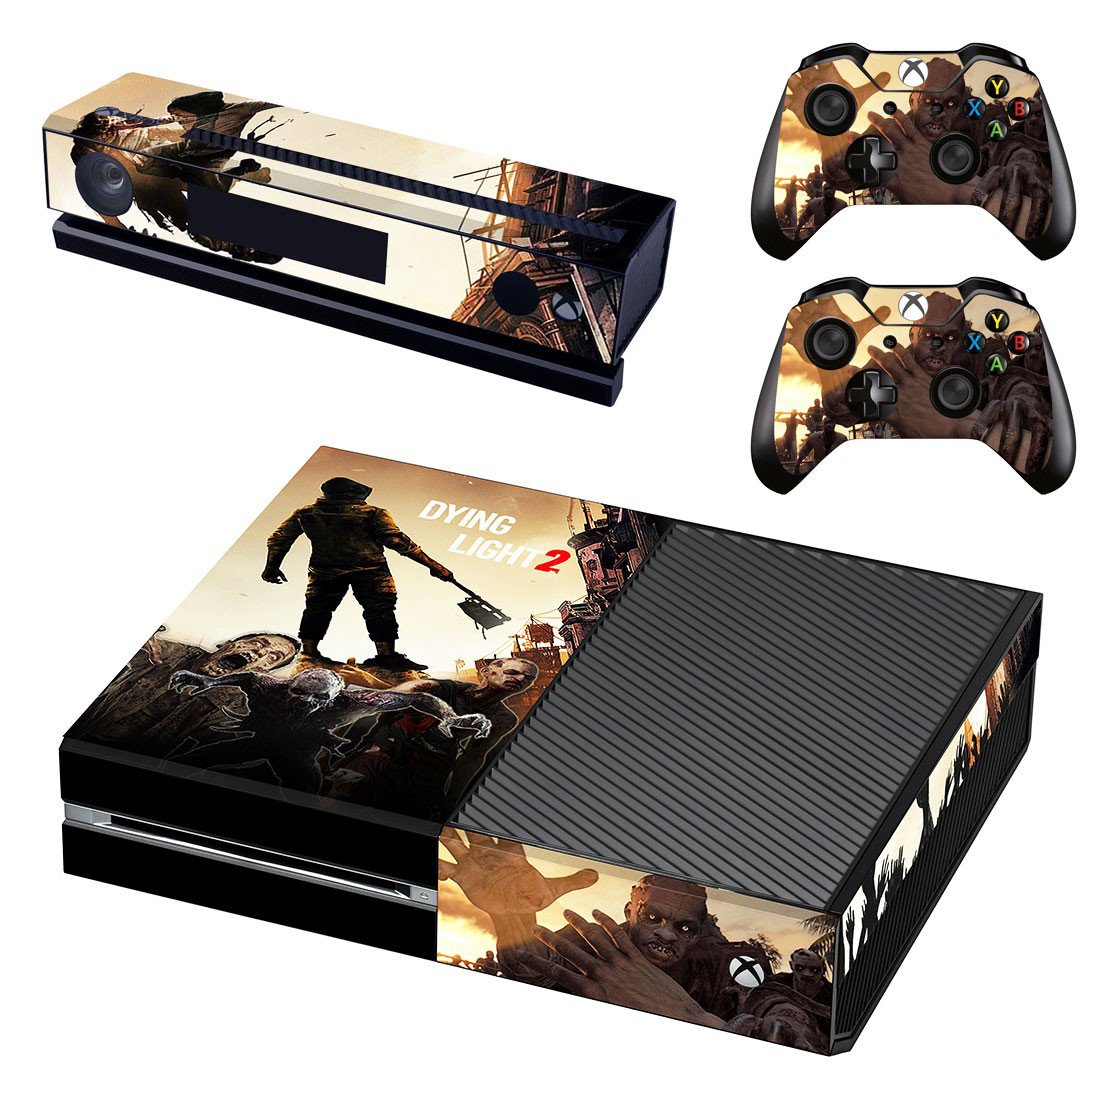 Xbox One And Controllers Skin Cover Dying Light 2